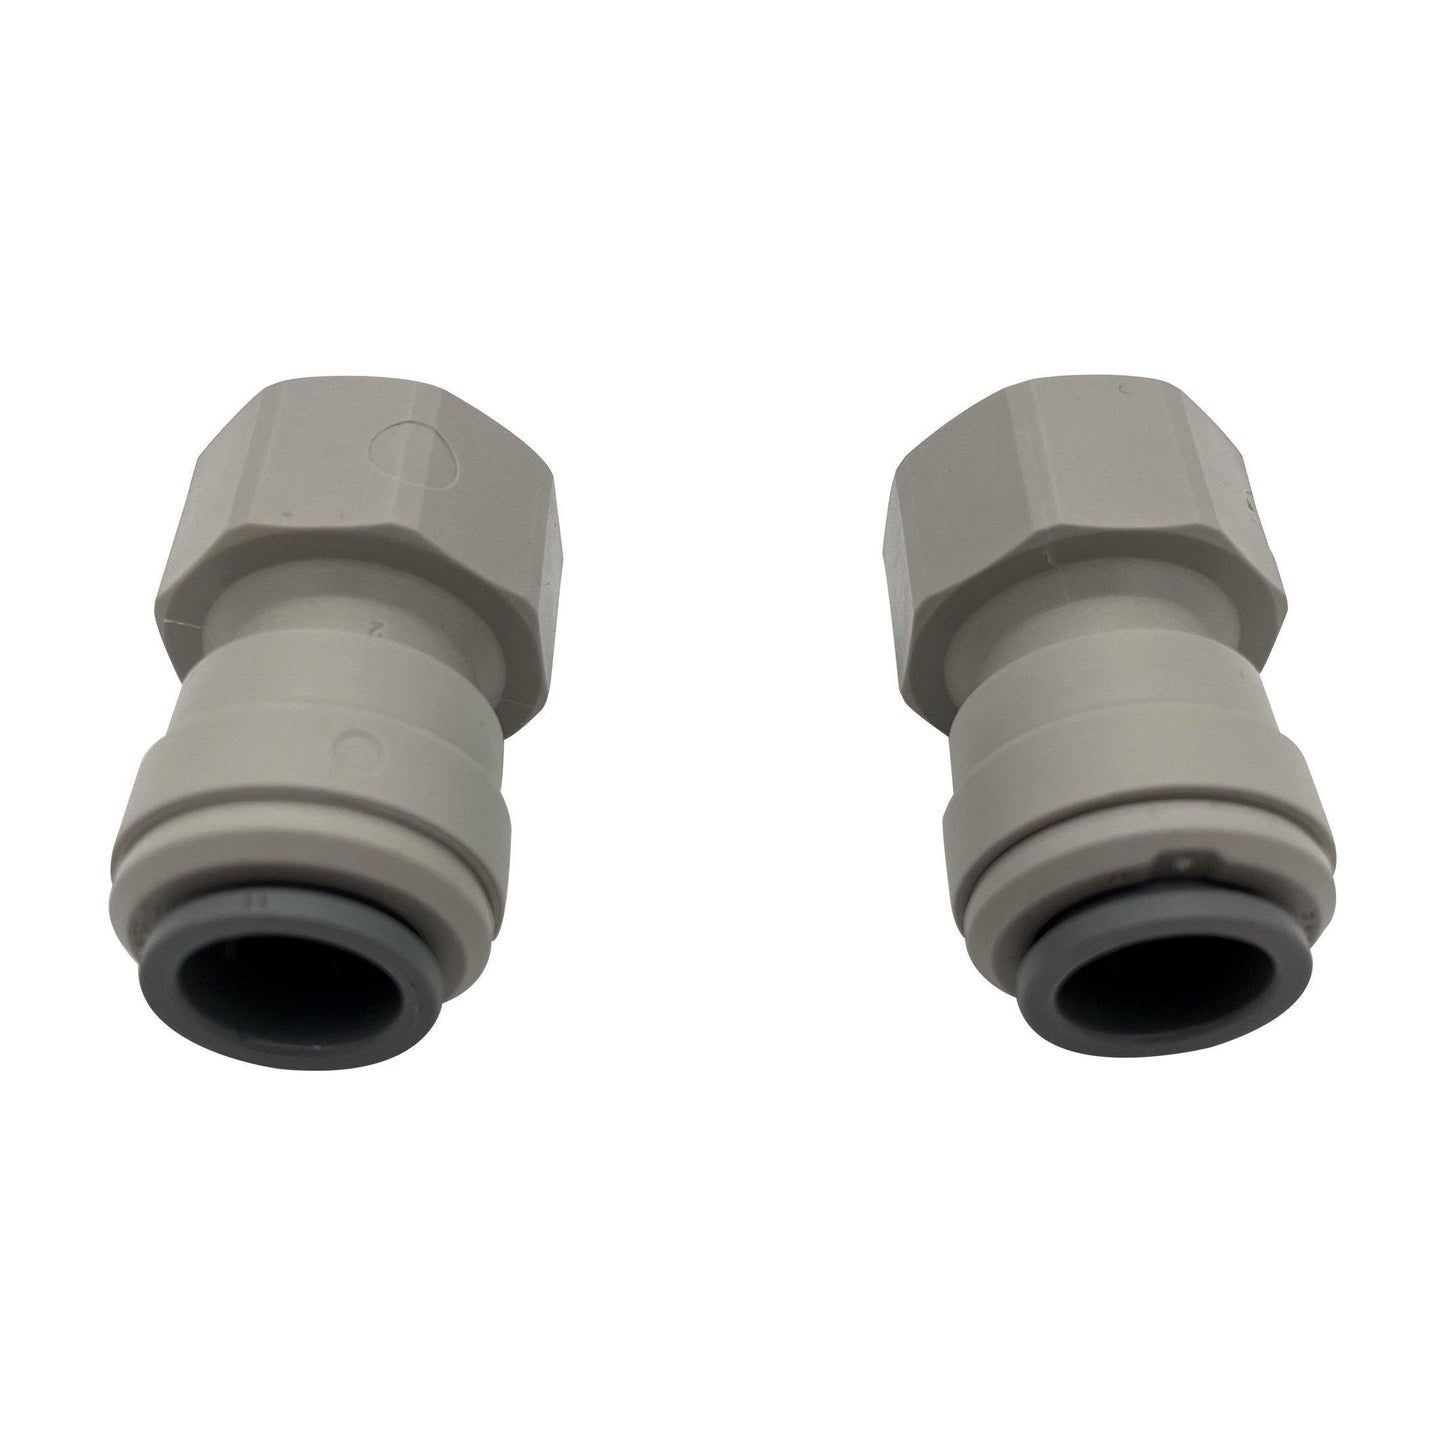 John Guest Speed Fit Tap Adaptors - 2 Pack - Free Delivery - Cams Cords